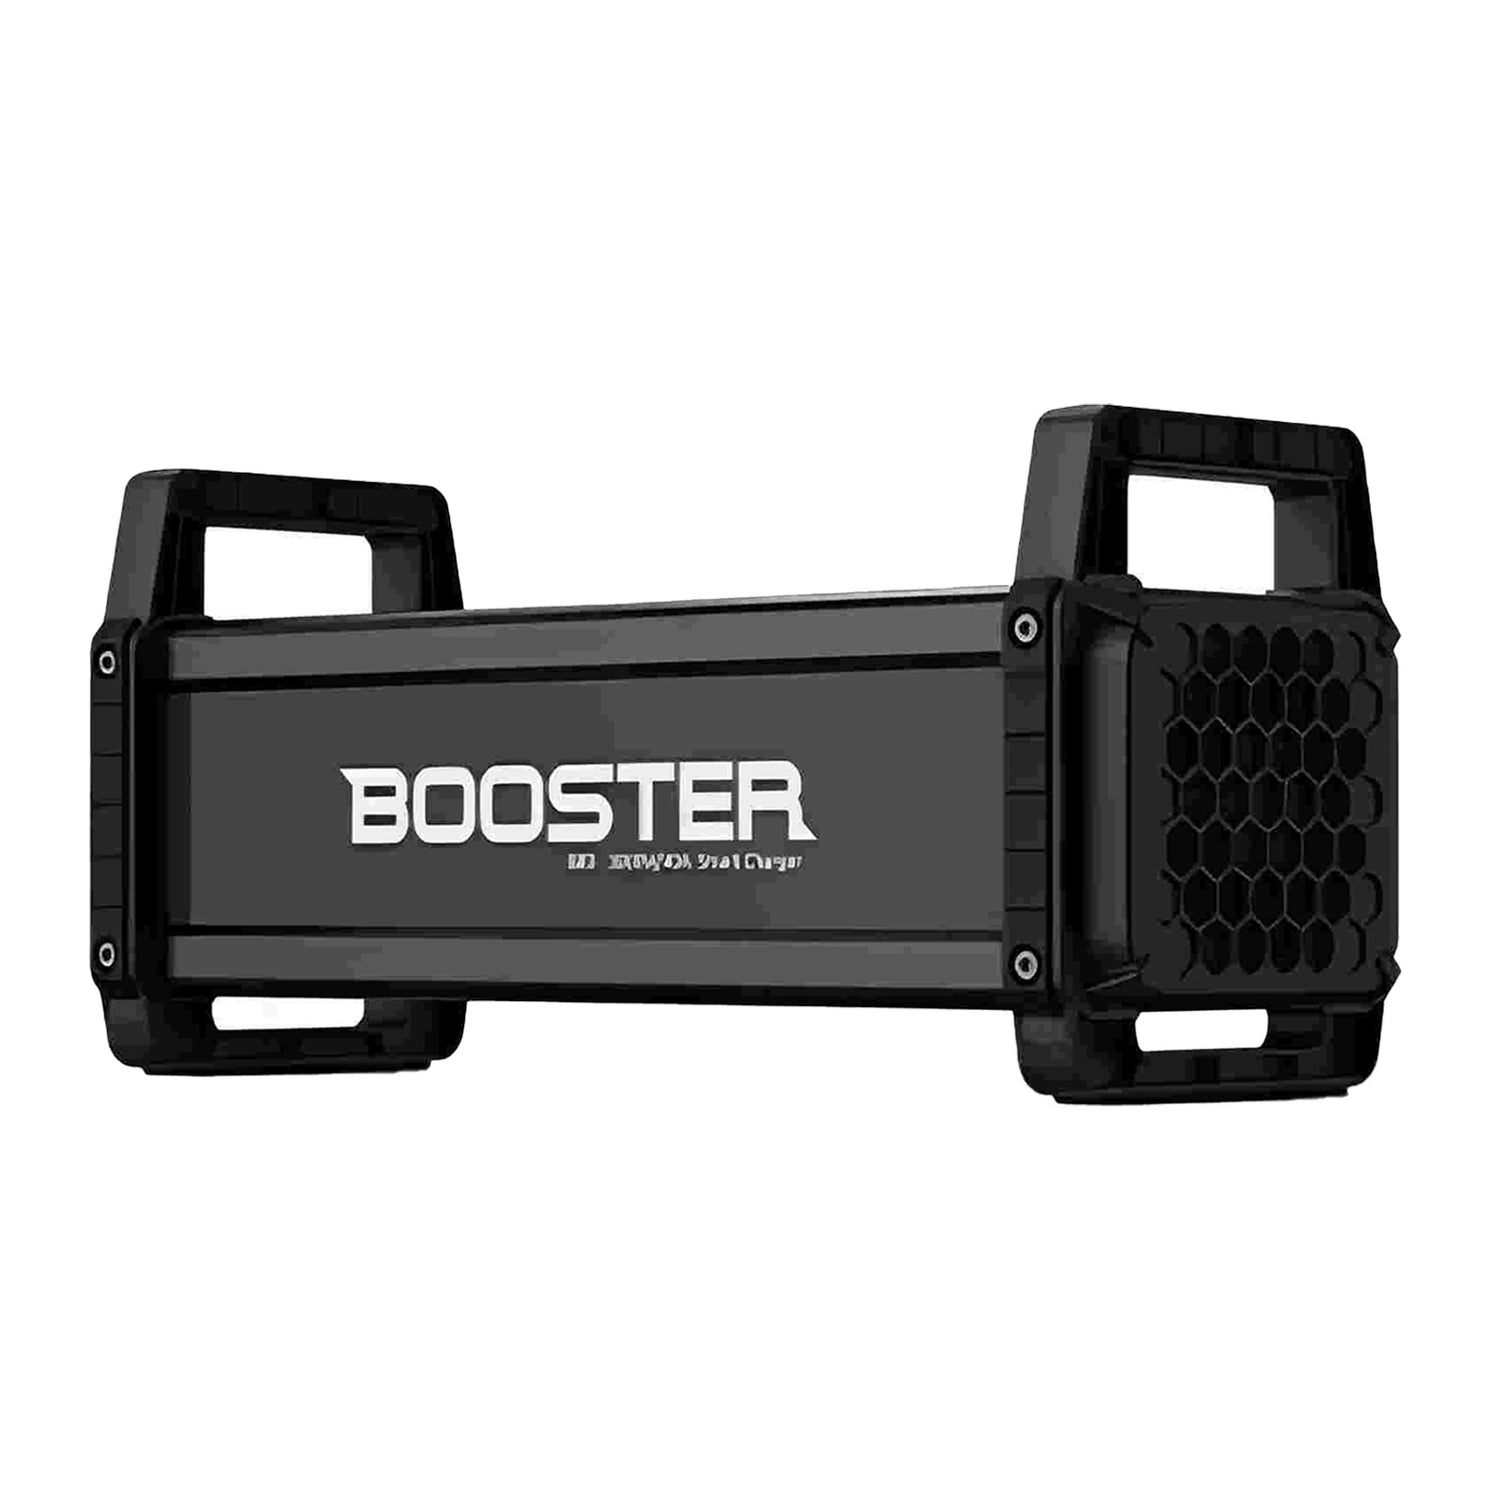 B60/B80 Professional 22S Smart Lipo Charger, AC 3000W Cargo y 200W Descarga de ciclo de equilibrio Charger, Fast Charger for Life, Lipo, LIHV, UliHV Batteries